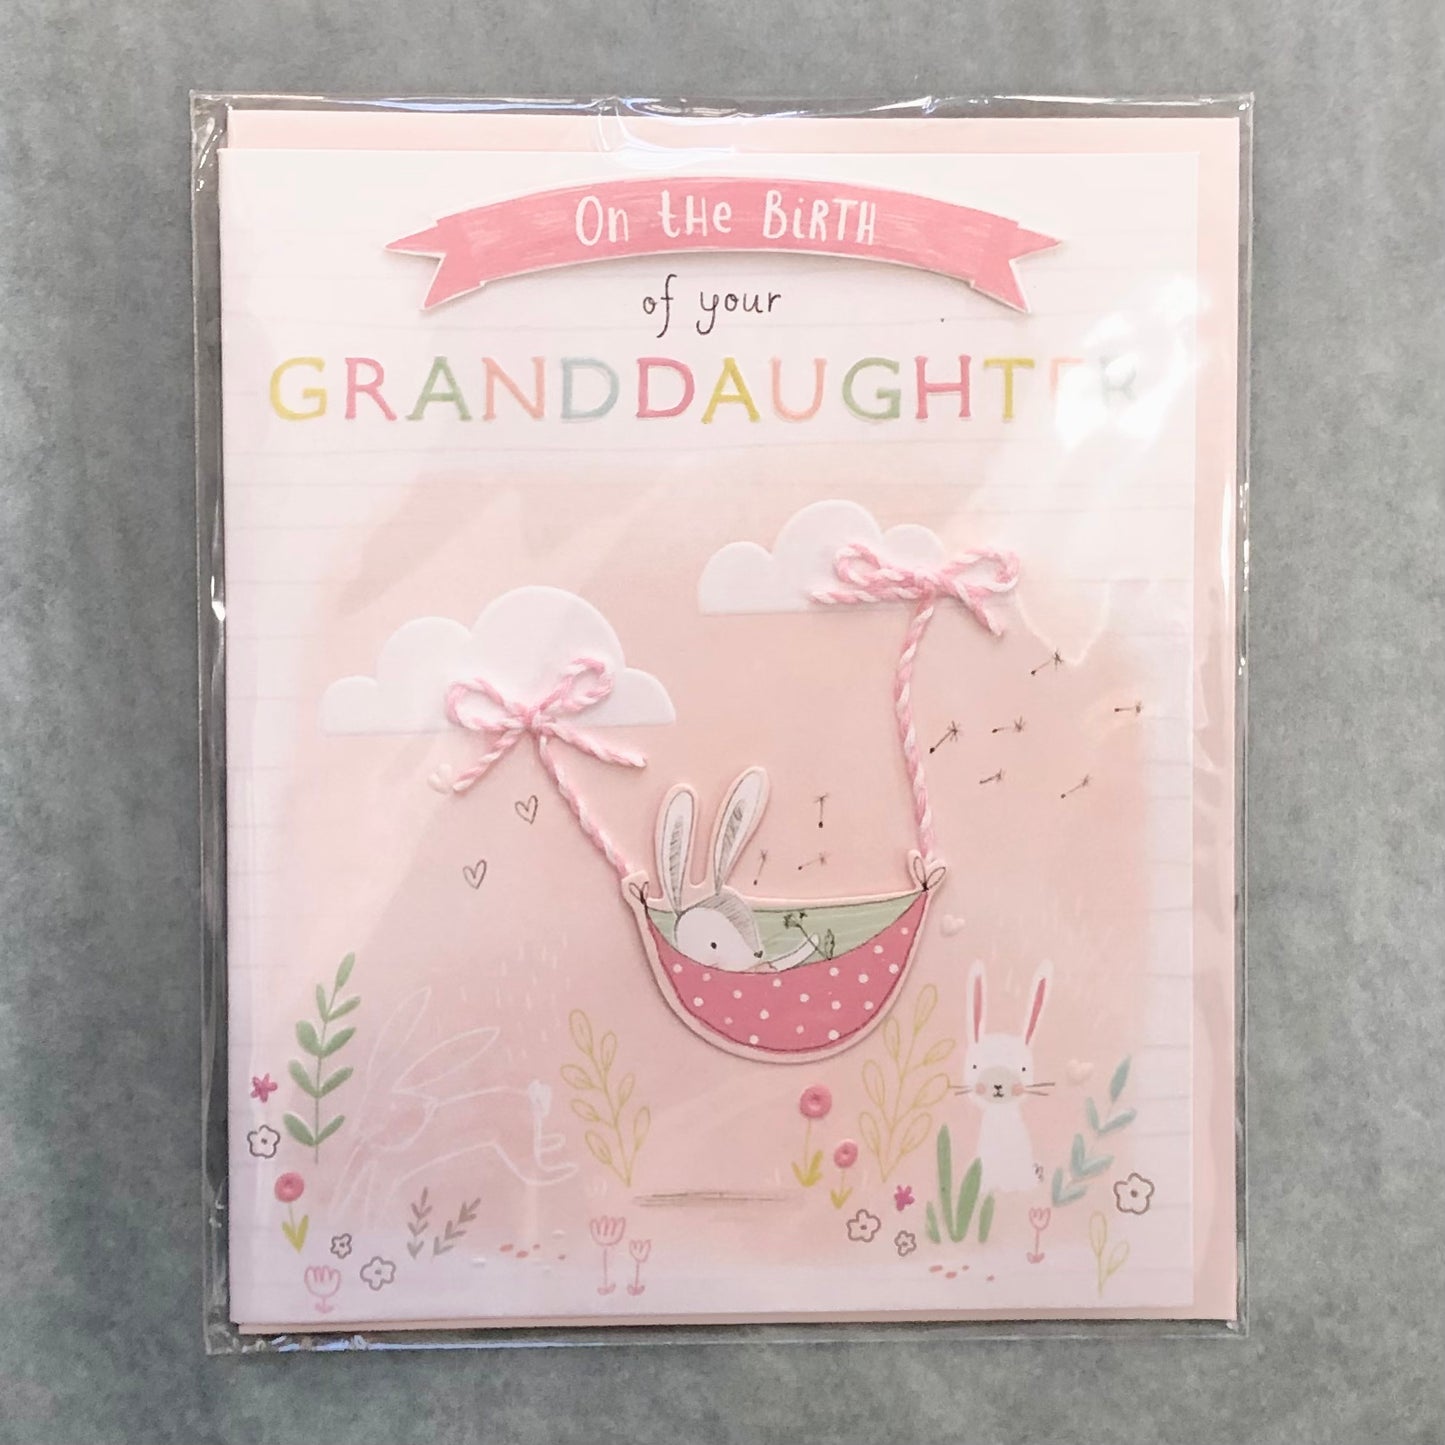 On the Birth of your Granddaughter Card | Oscar & Me | Baby & Children’s Clothing & Accessories